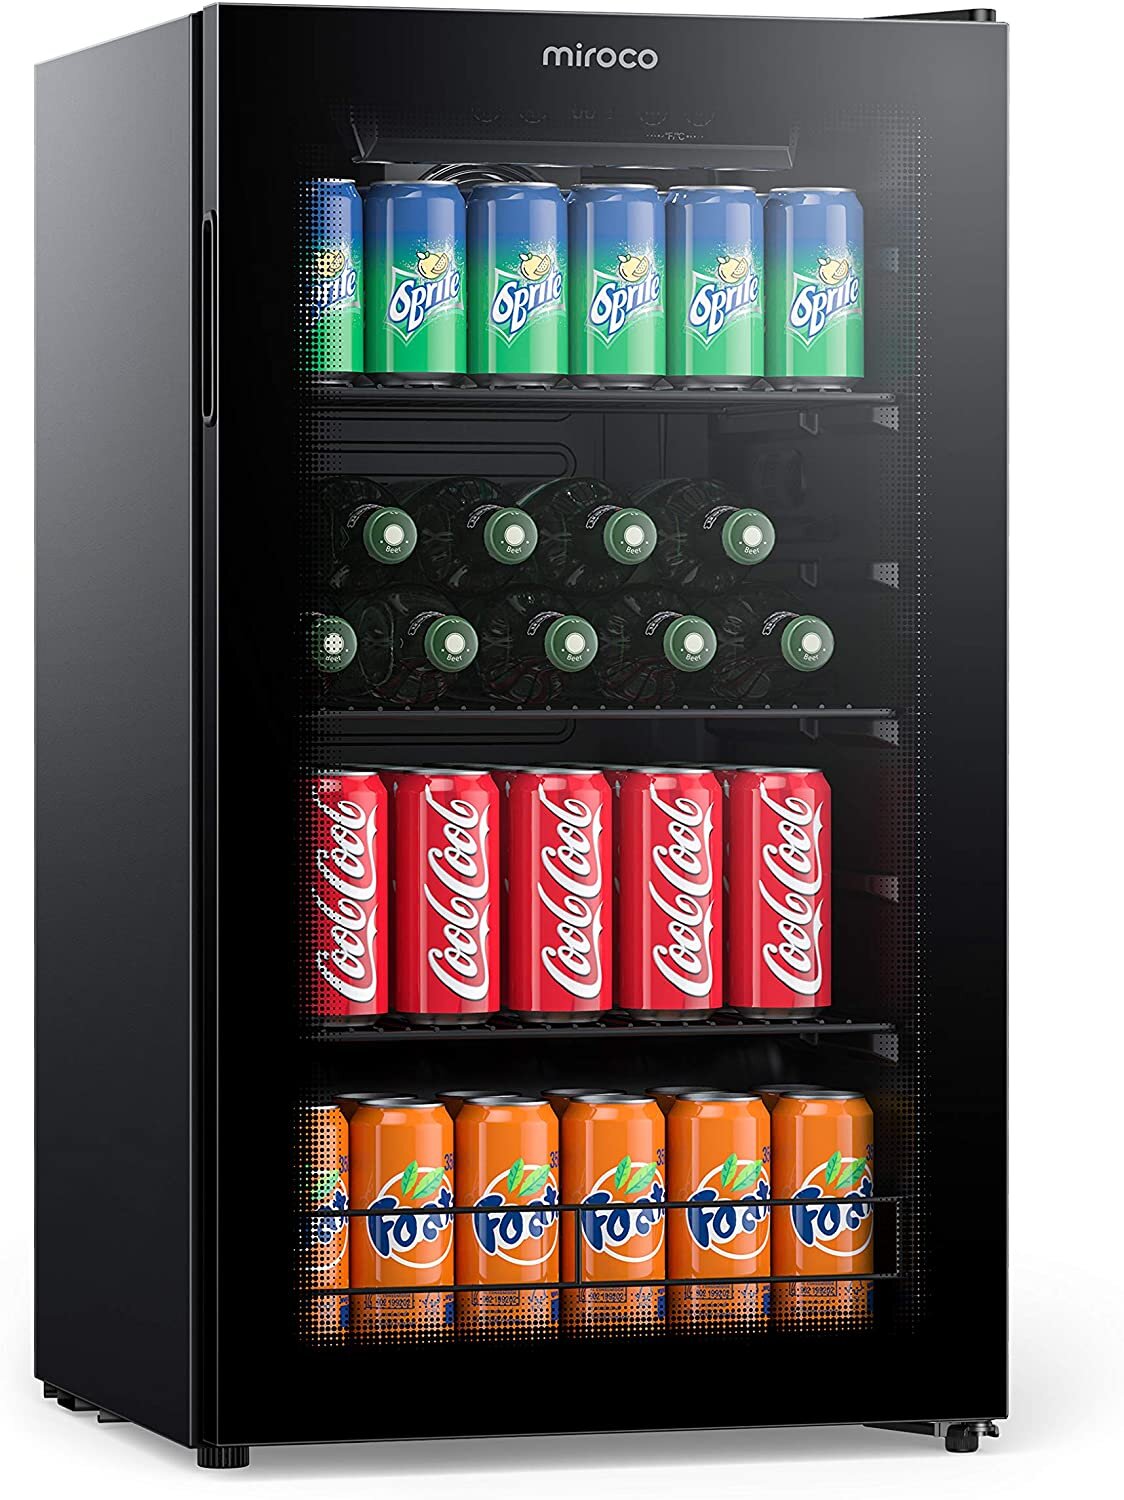 101 Can Small Refrigerator, Mini Drink Fridge, Beverage Cooler for Home & Office, Stainless Steel